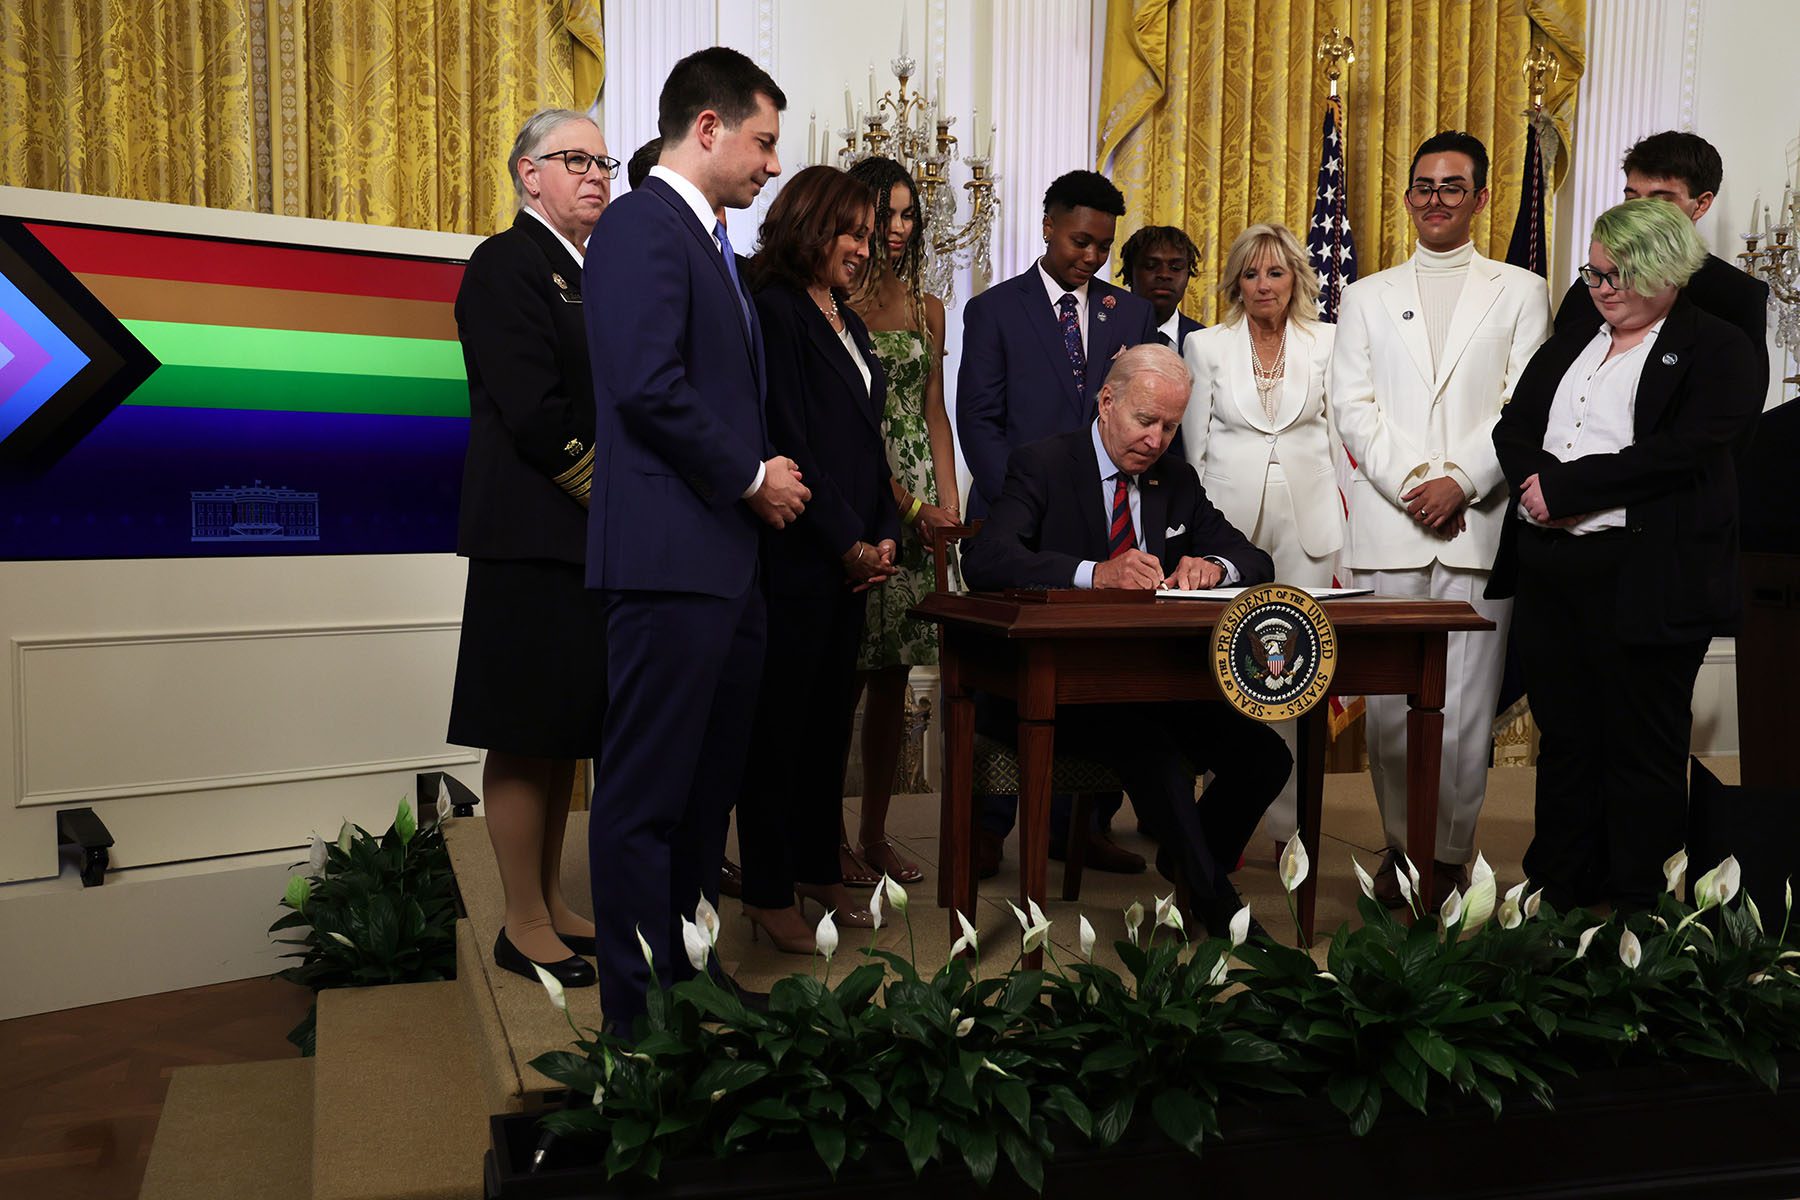 President Biden signs an executive order at a desk as others look on.